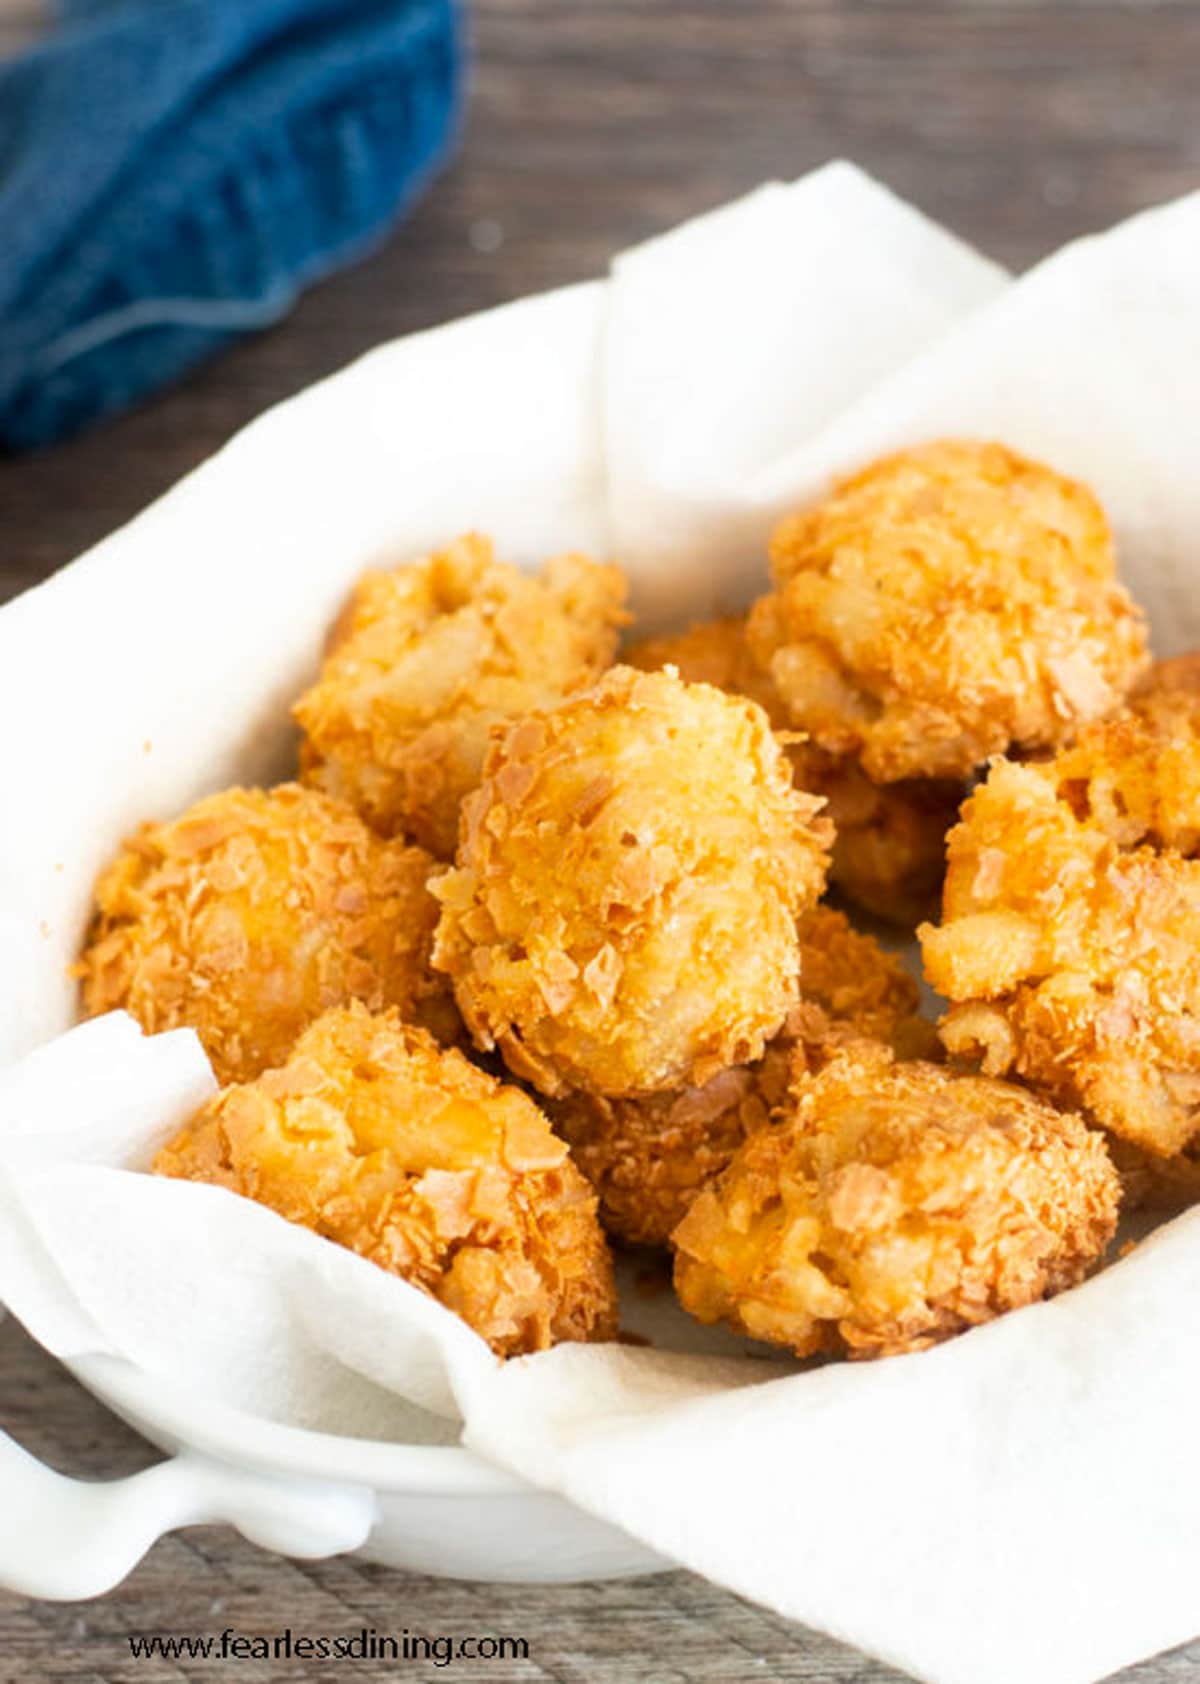 A basket of fried mac and cheese bites.